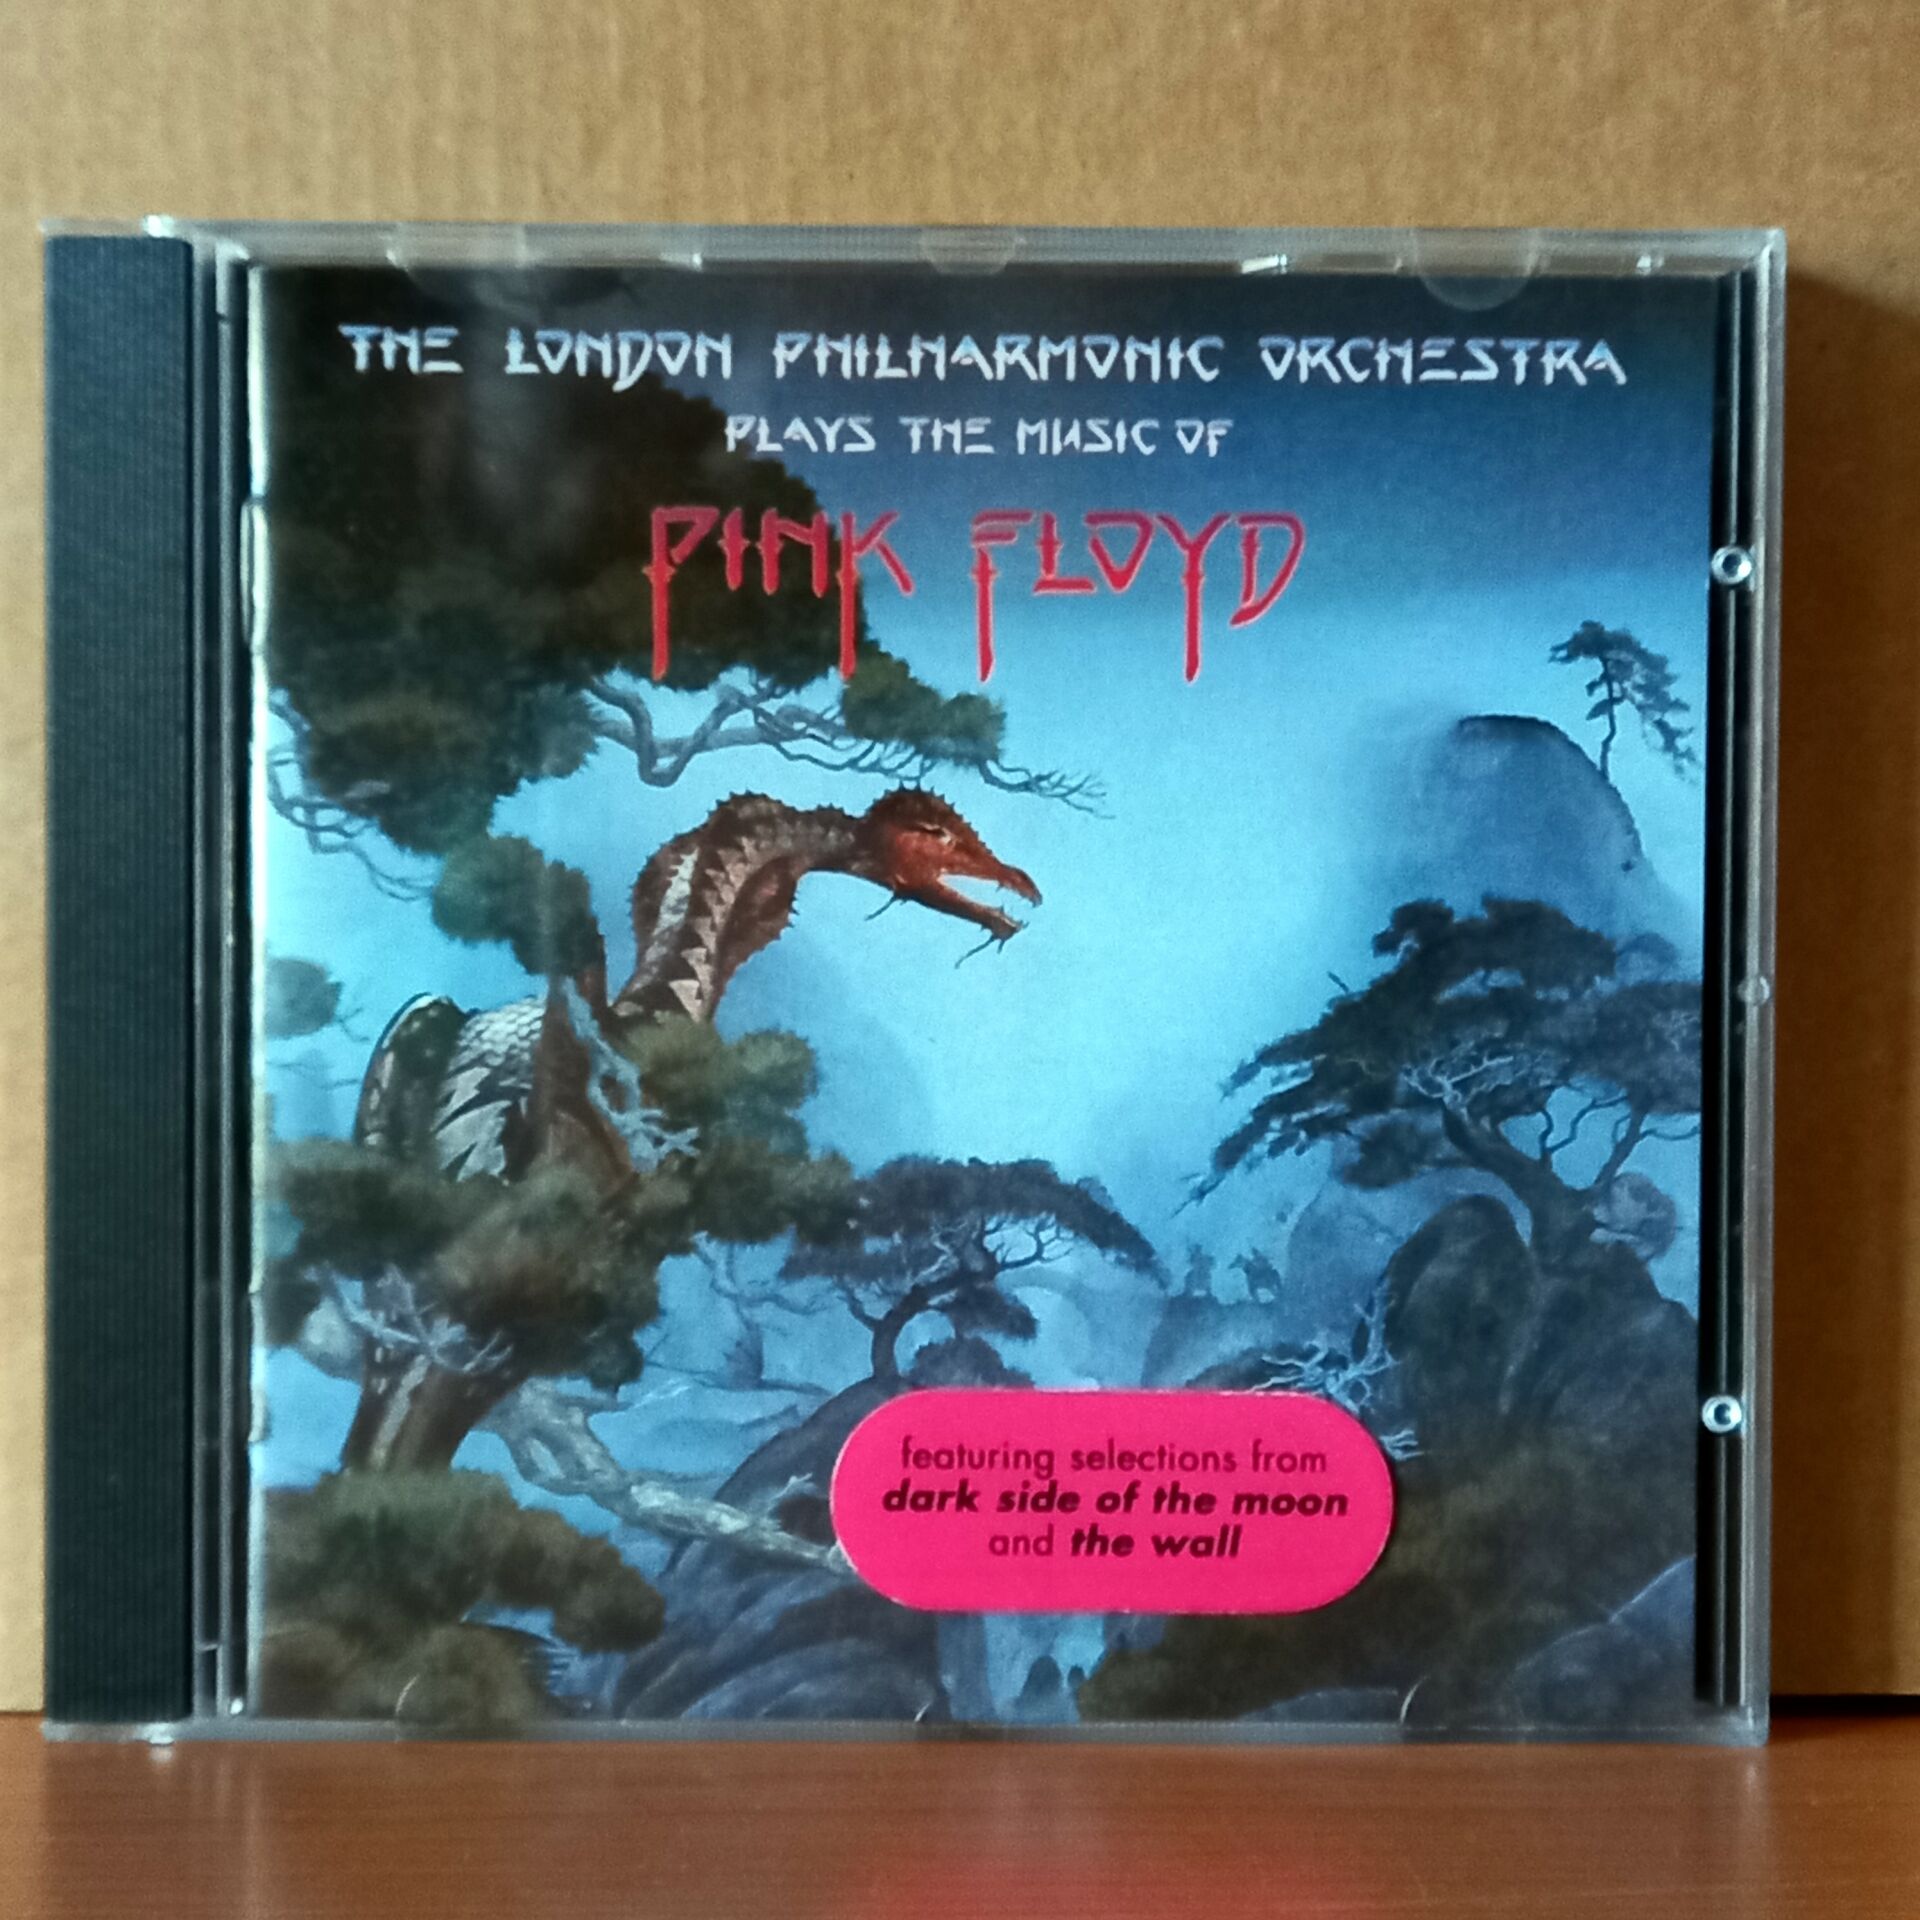 THE LONDON PHILHARMONIC ORCHESTRA PLAYS THE MUSIC OF PINK FLOYD / CONDUCTED BY PETER SCHOLES (1995) - CD 2.EL